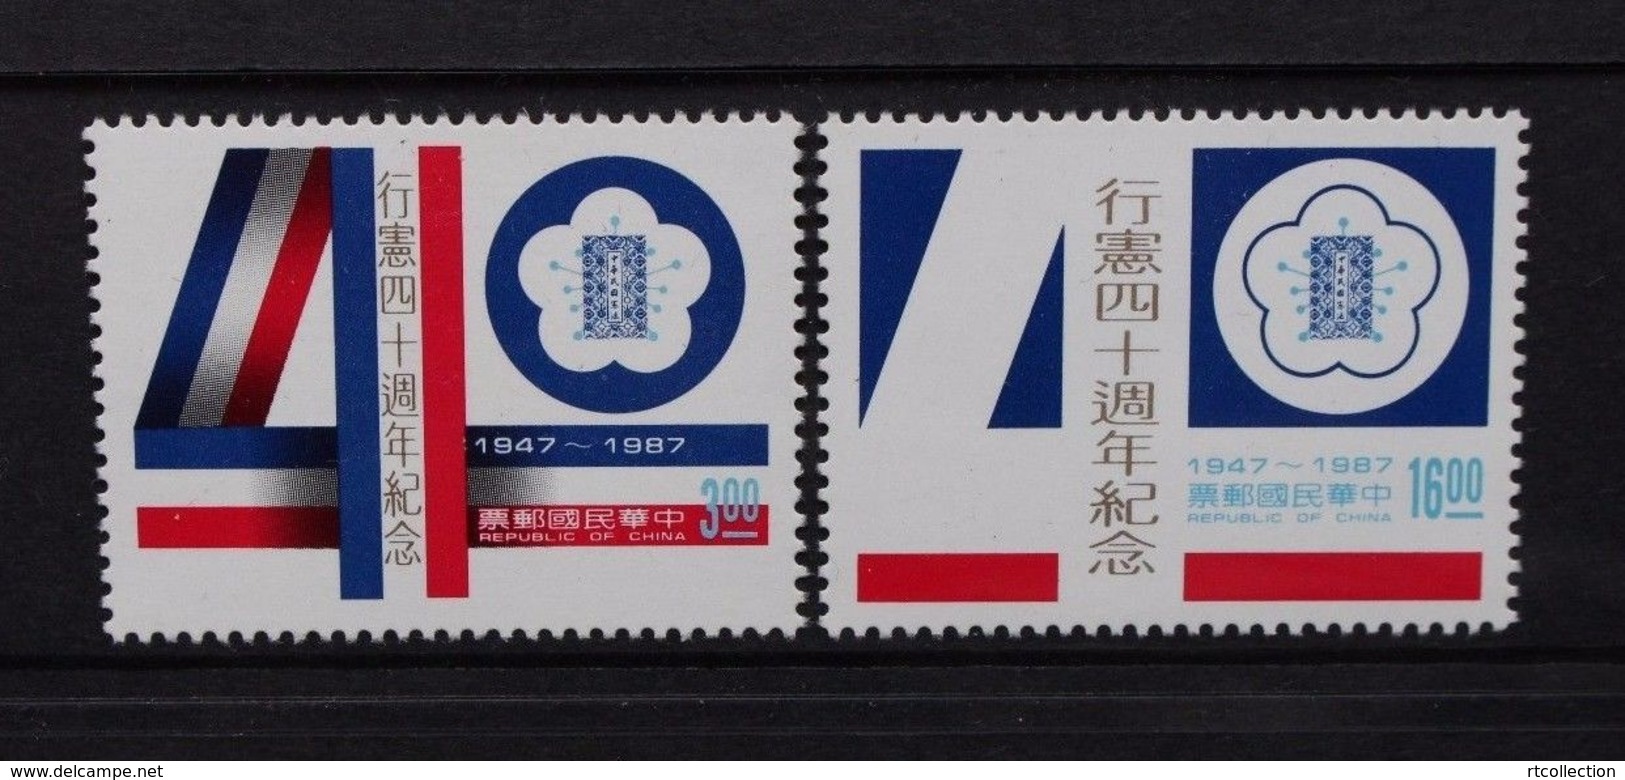 Taiwan 1987 Republic Of China 40th Anniversary Of Constitution Book Plum Blossom Justice Flags Stamps MNH SG 1776-1777 - Stamps